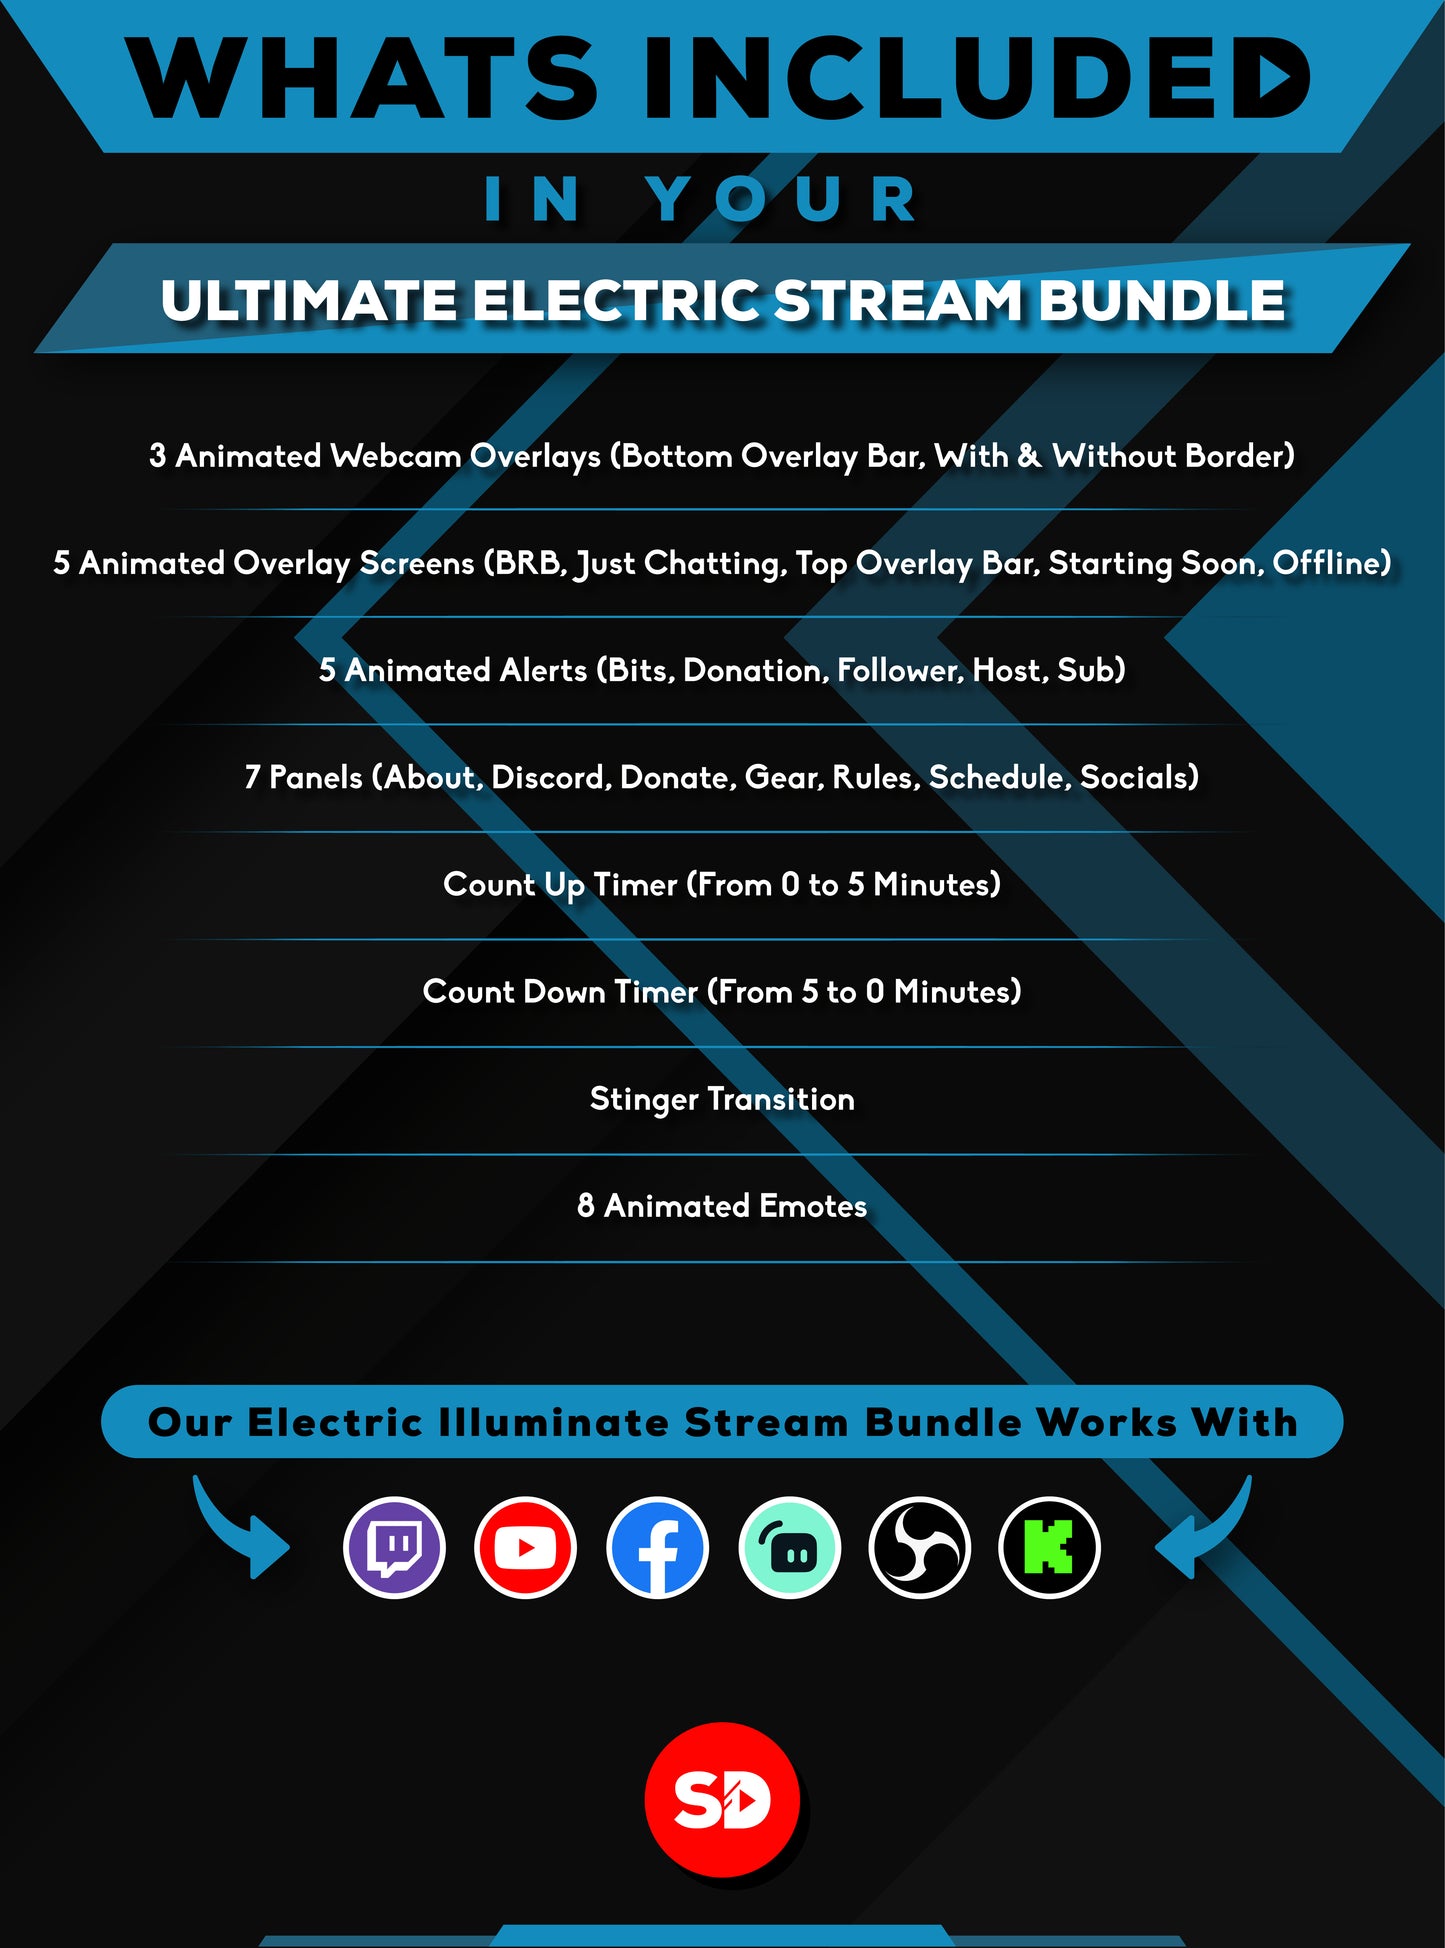 ultimate stream bundle electric whats included in your package stream designz